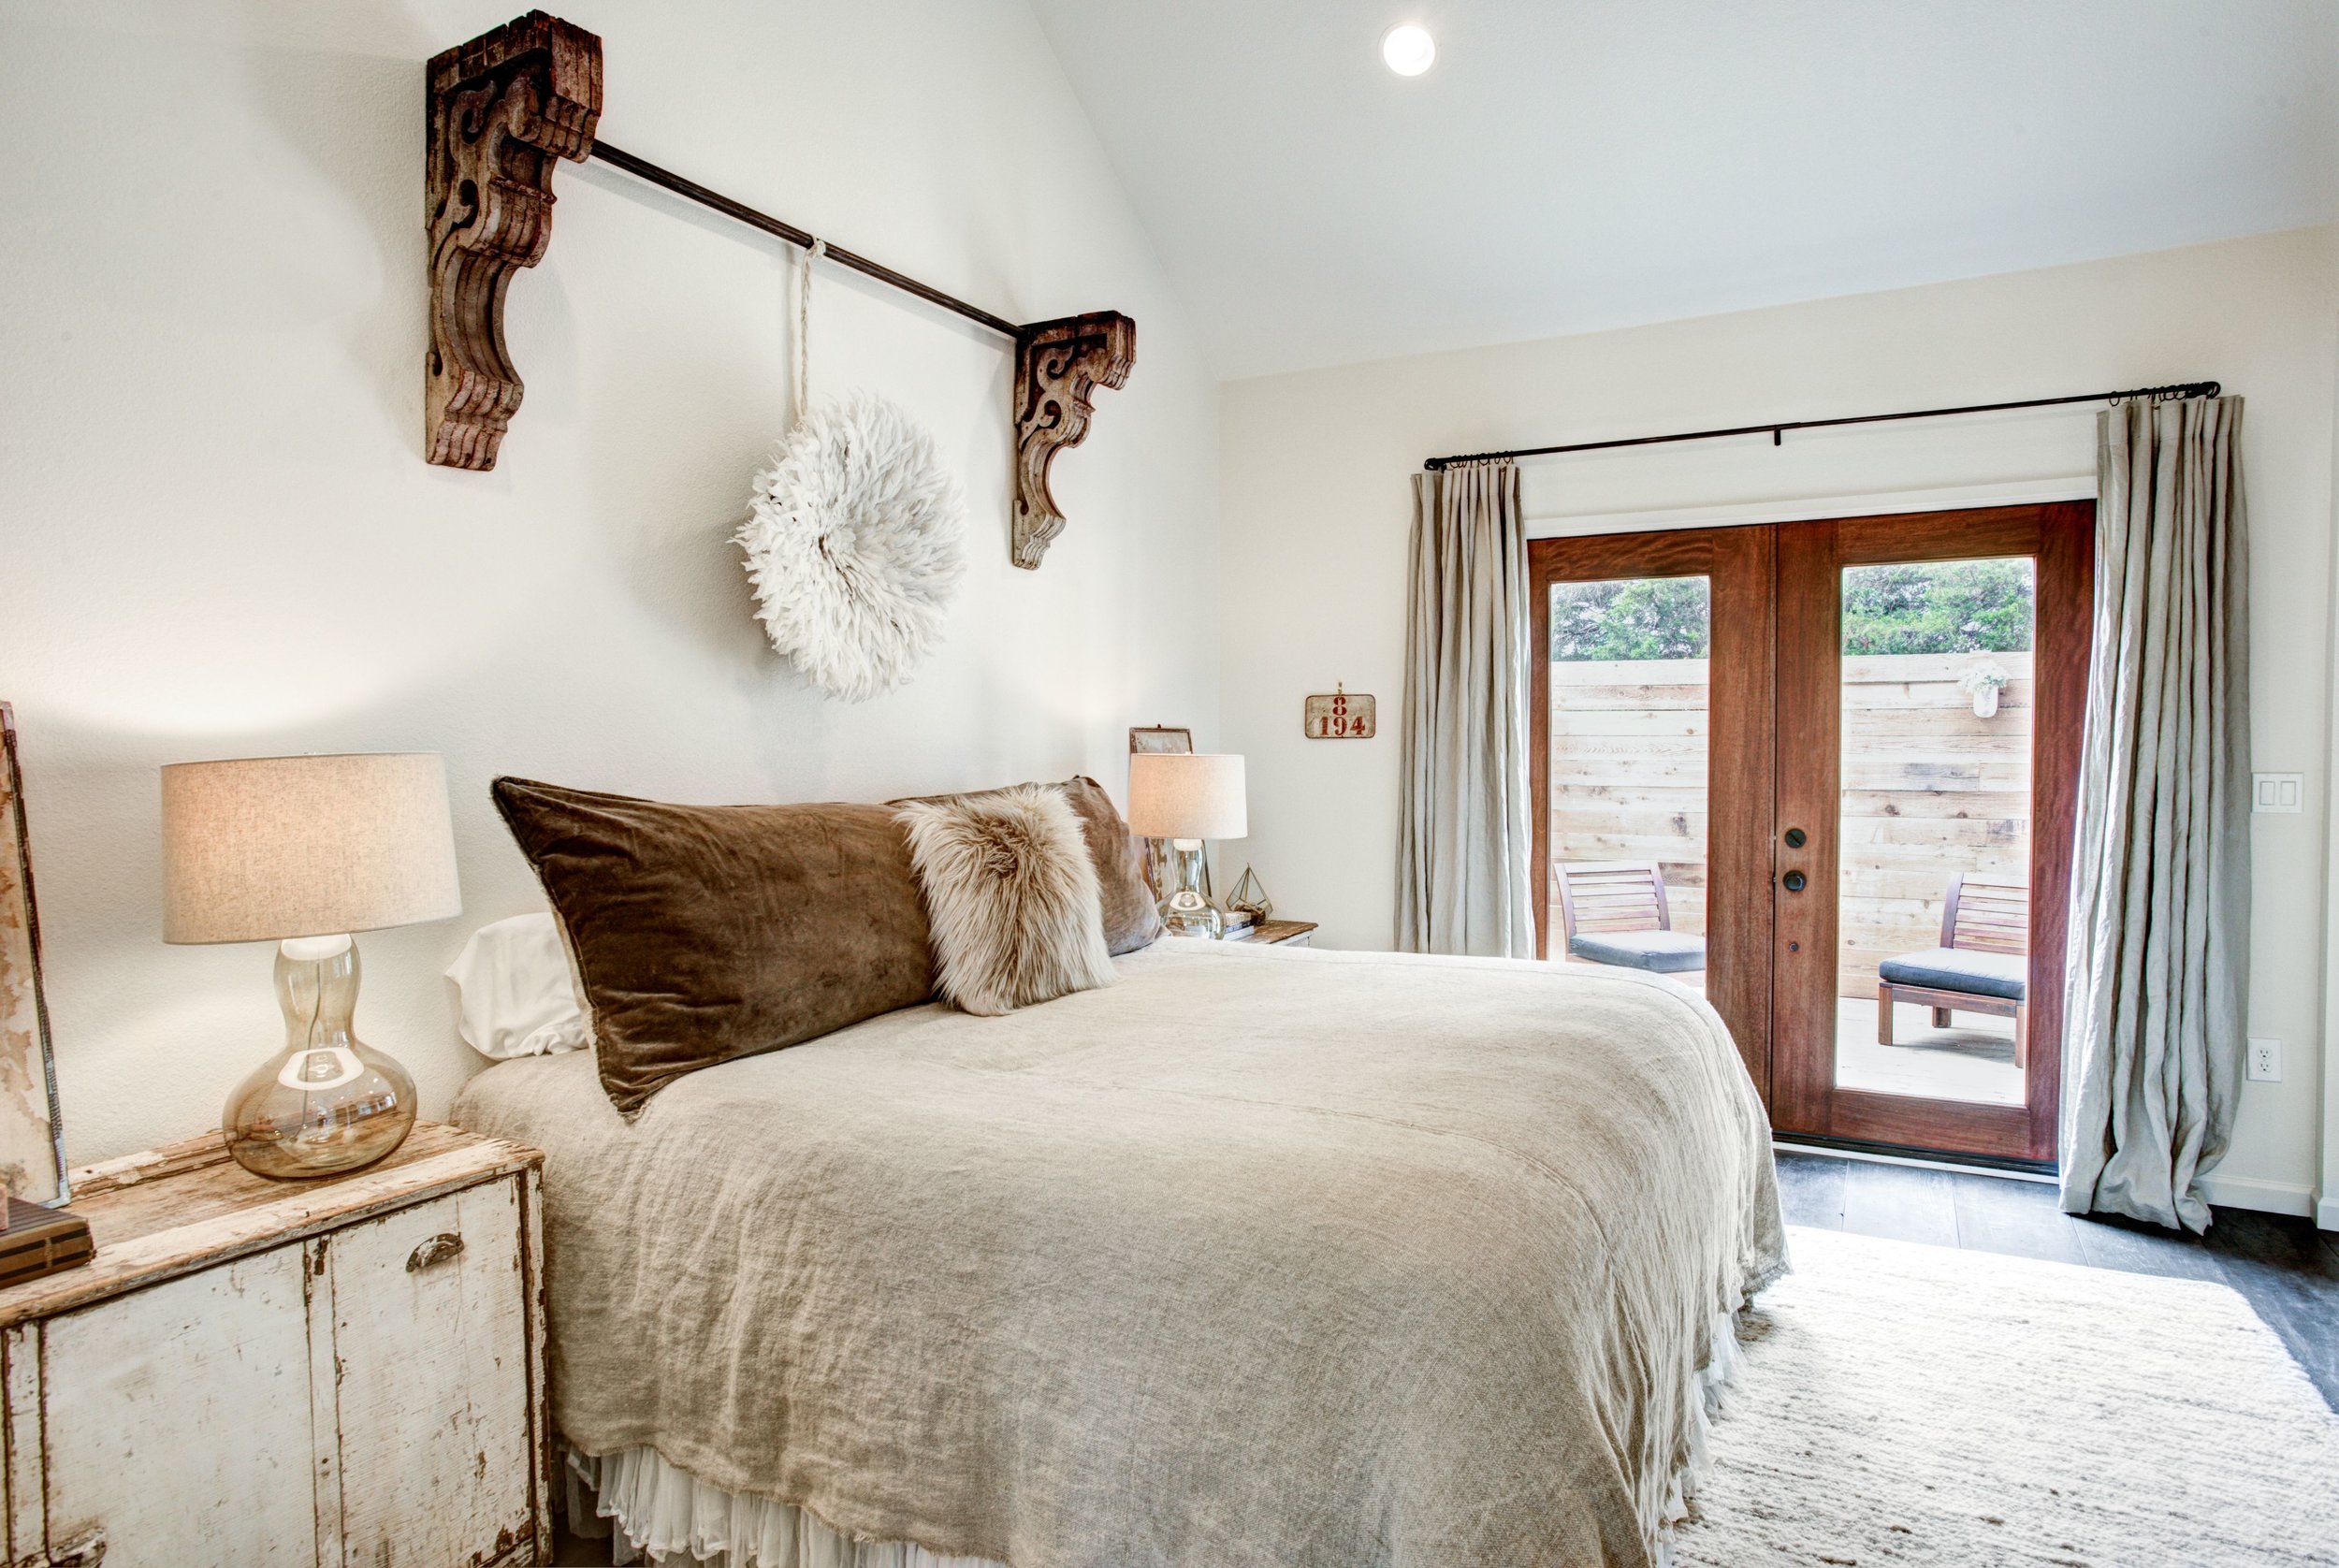   The Boho master bedroom features a king-sized bed, ensuite full bath with soaking tub and separate shower, and a private ensuite patio.  